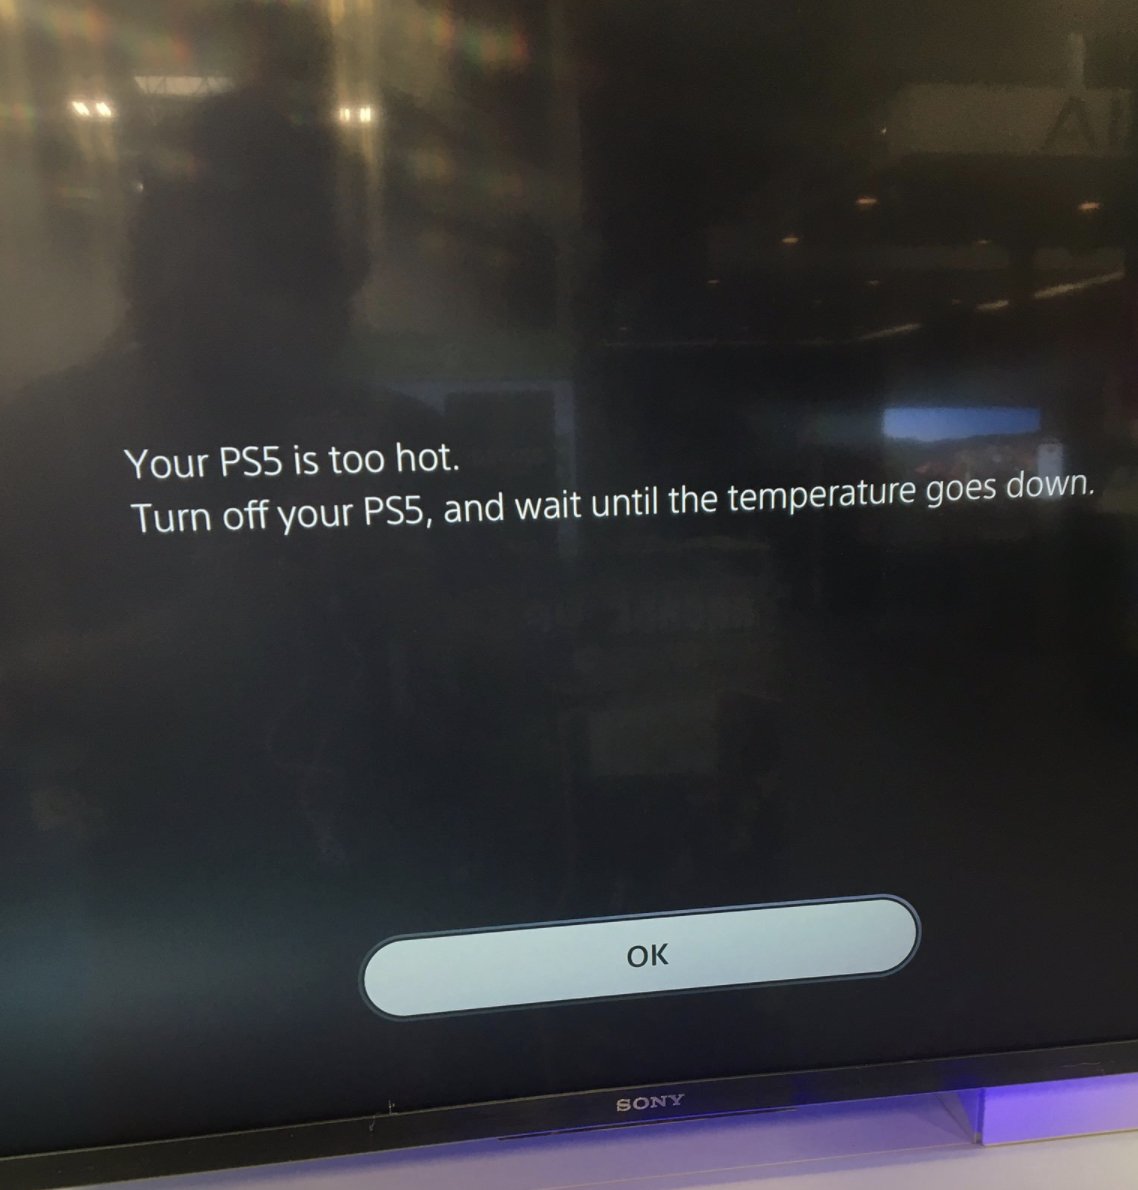 Showtime Productions on Twitter: "A PlayStation 5 inside a kiosk is reporting hot temps! Hopefully this is because it is enclosed. If not this is good! 💀 #PS5 https://t.co/7f5El4eu5U" /